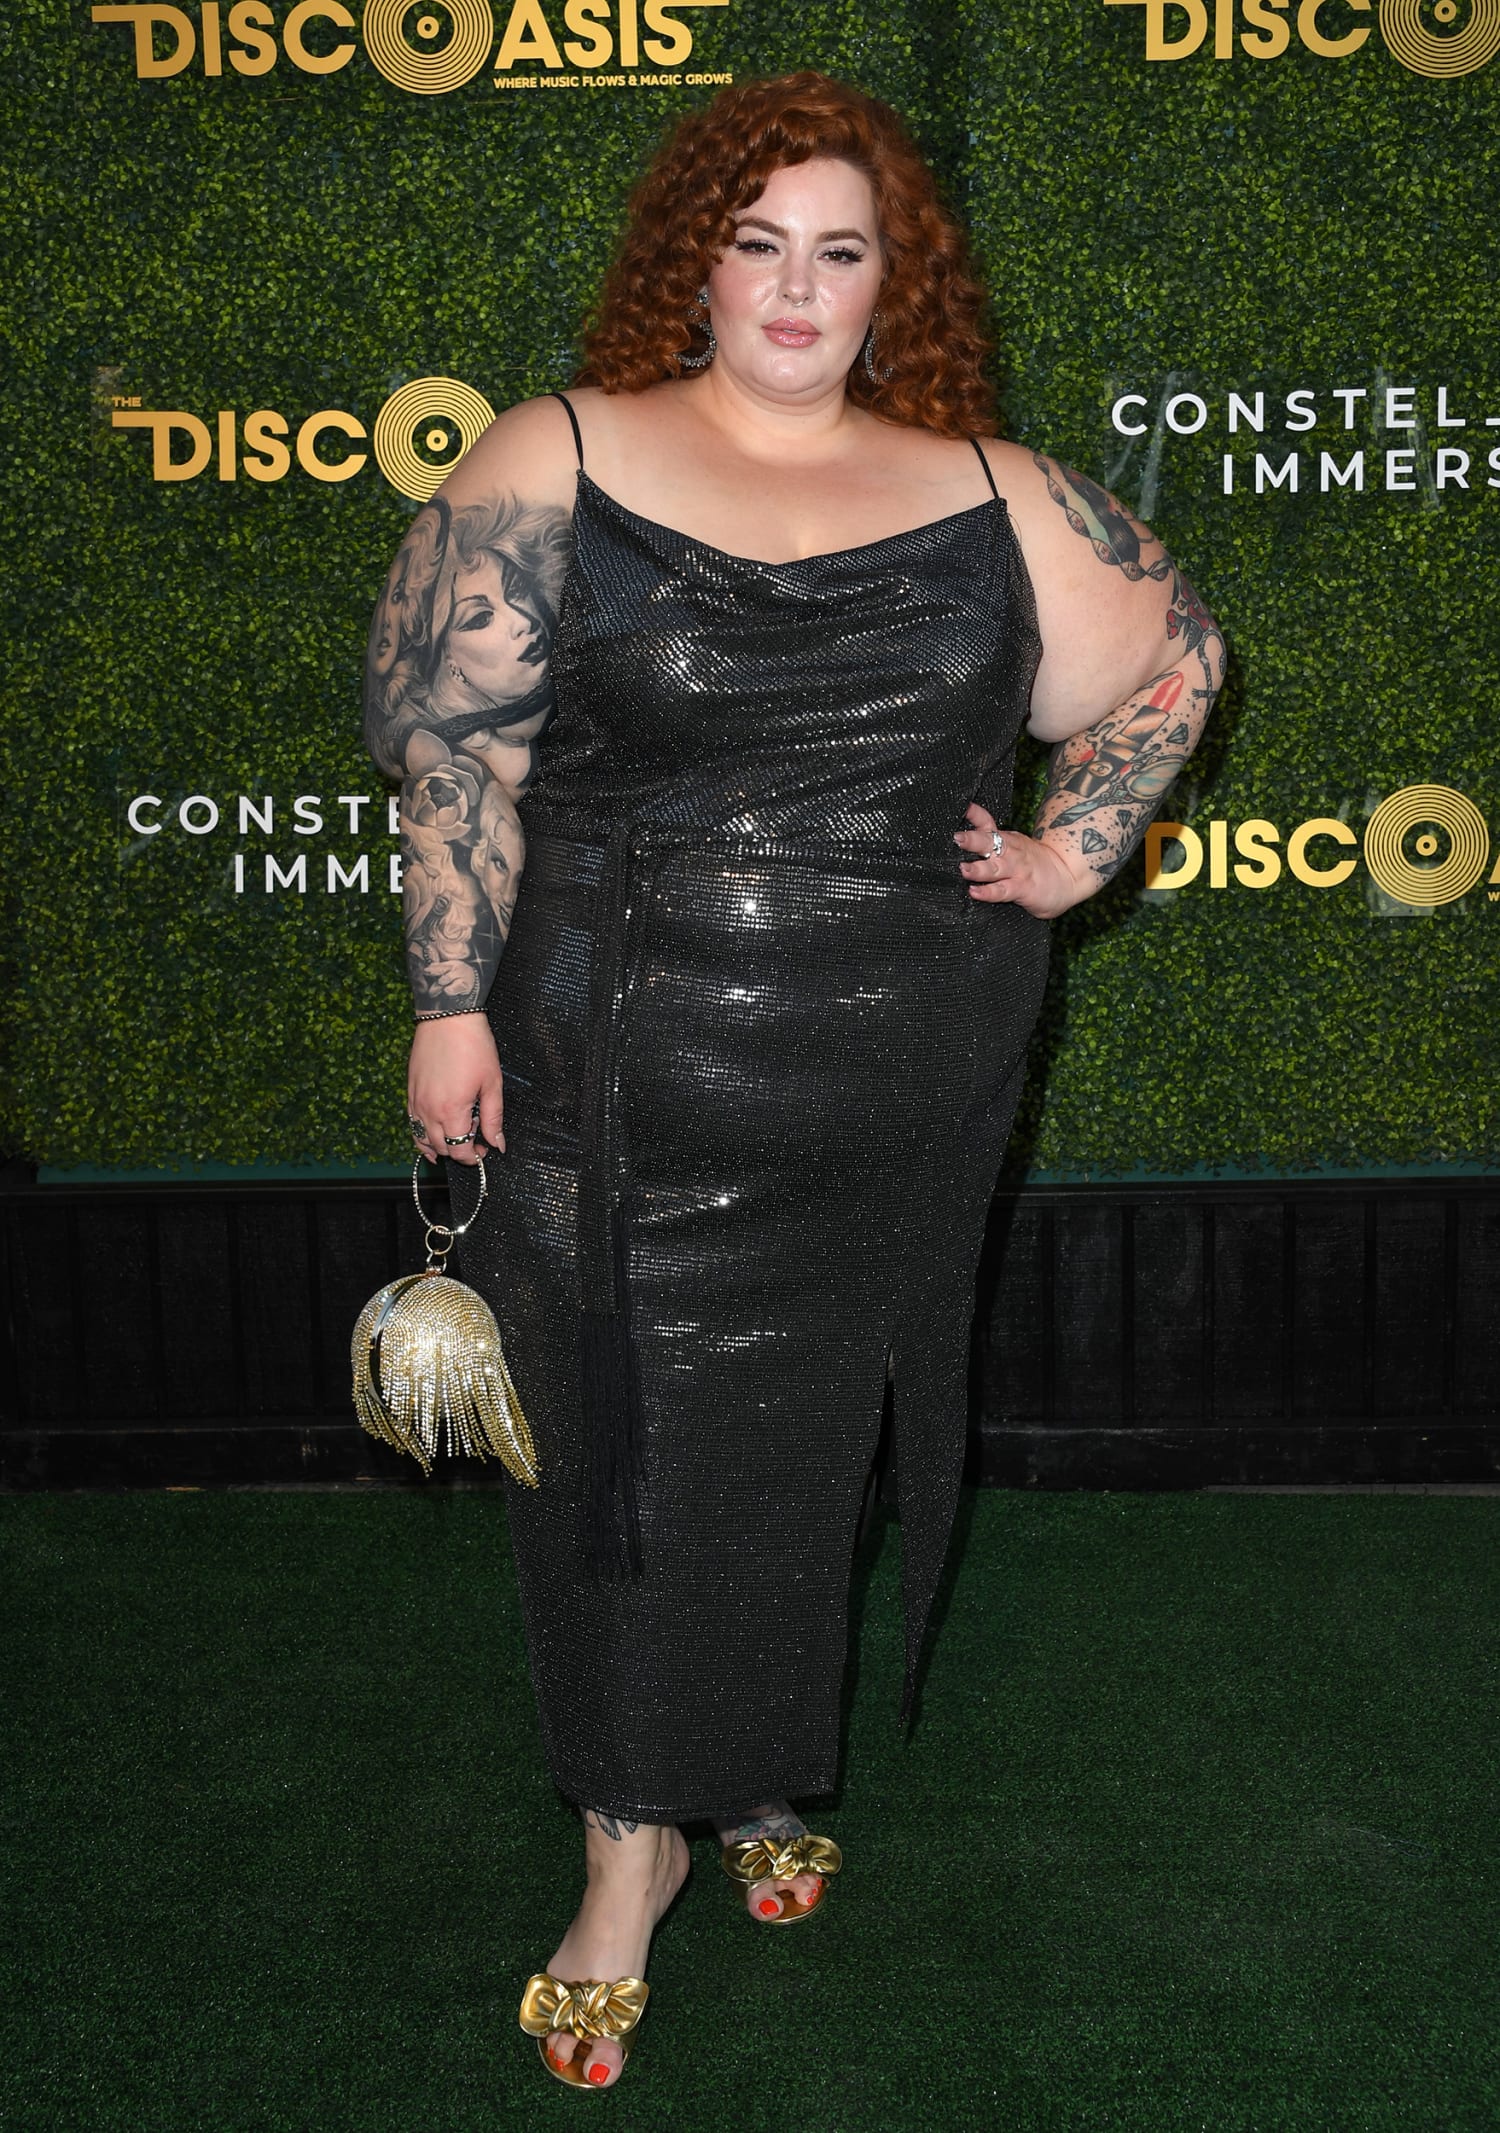 Tess Holliday: I was as shocked as everyone when I learned I had anorexia